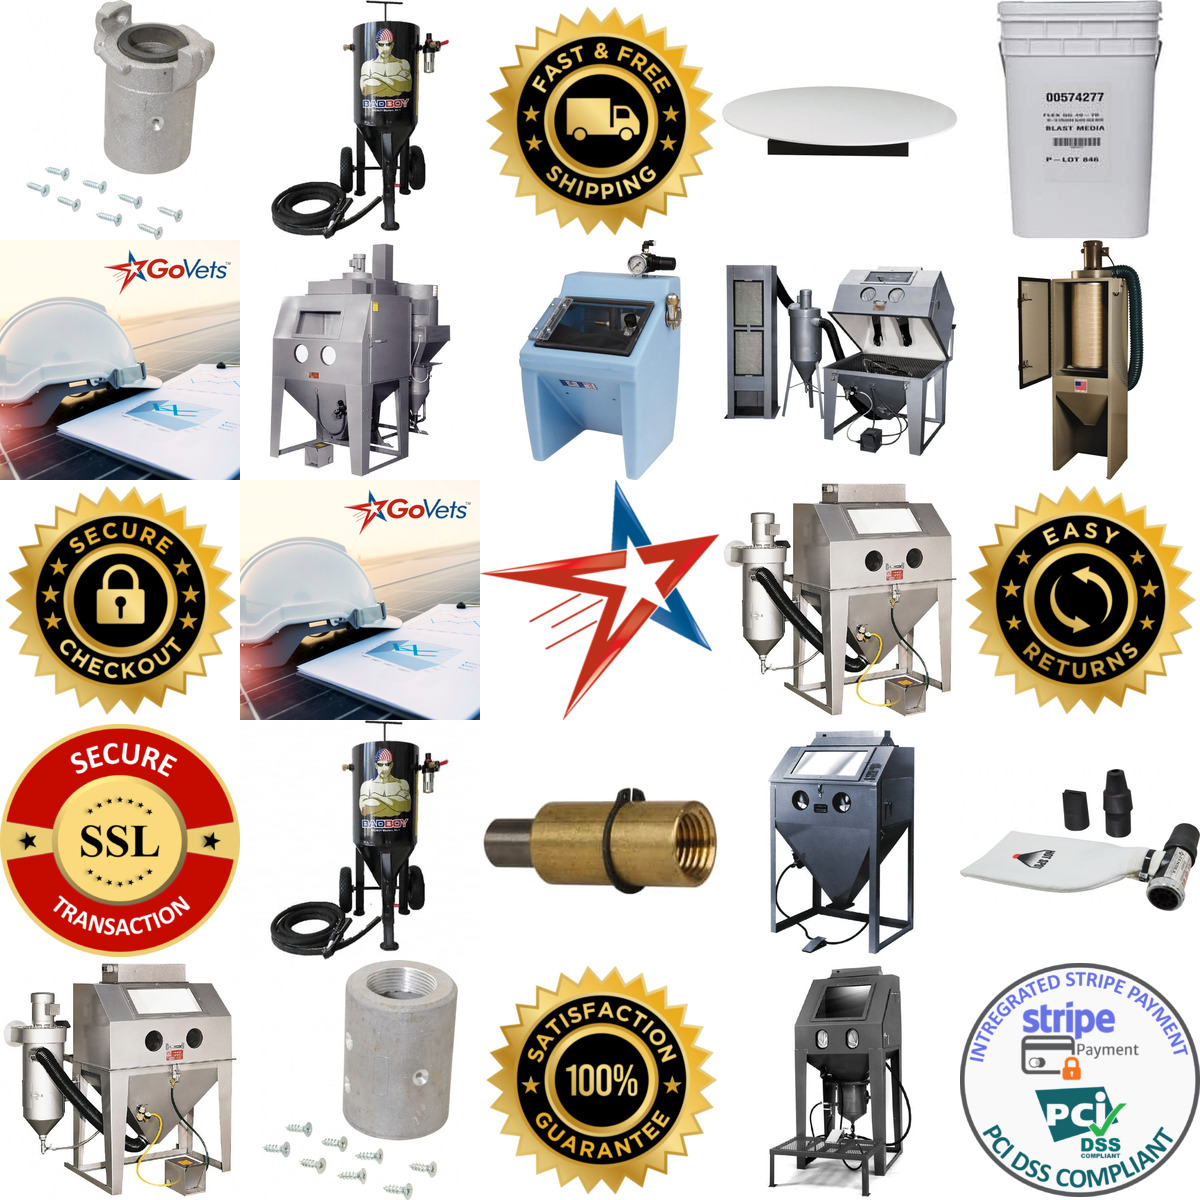 A selection of Sandblasting Equipment products on GoVets